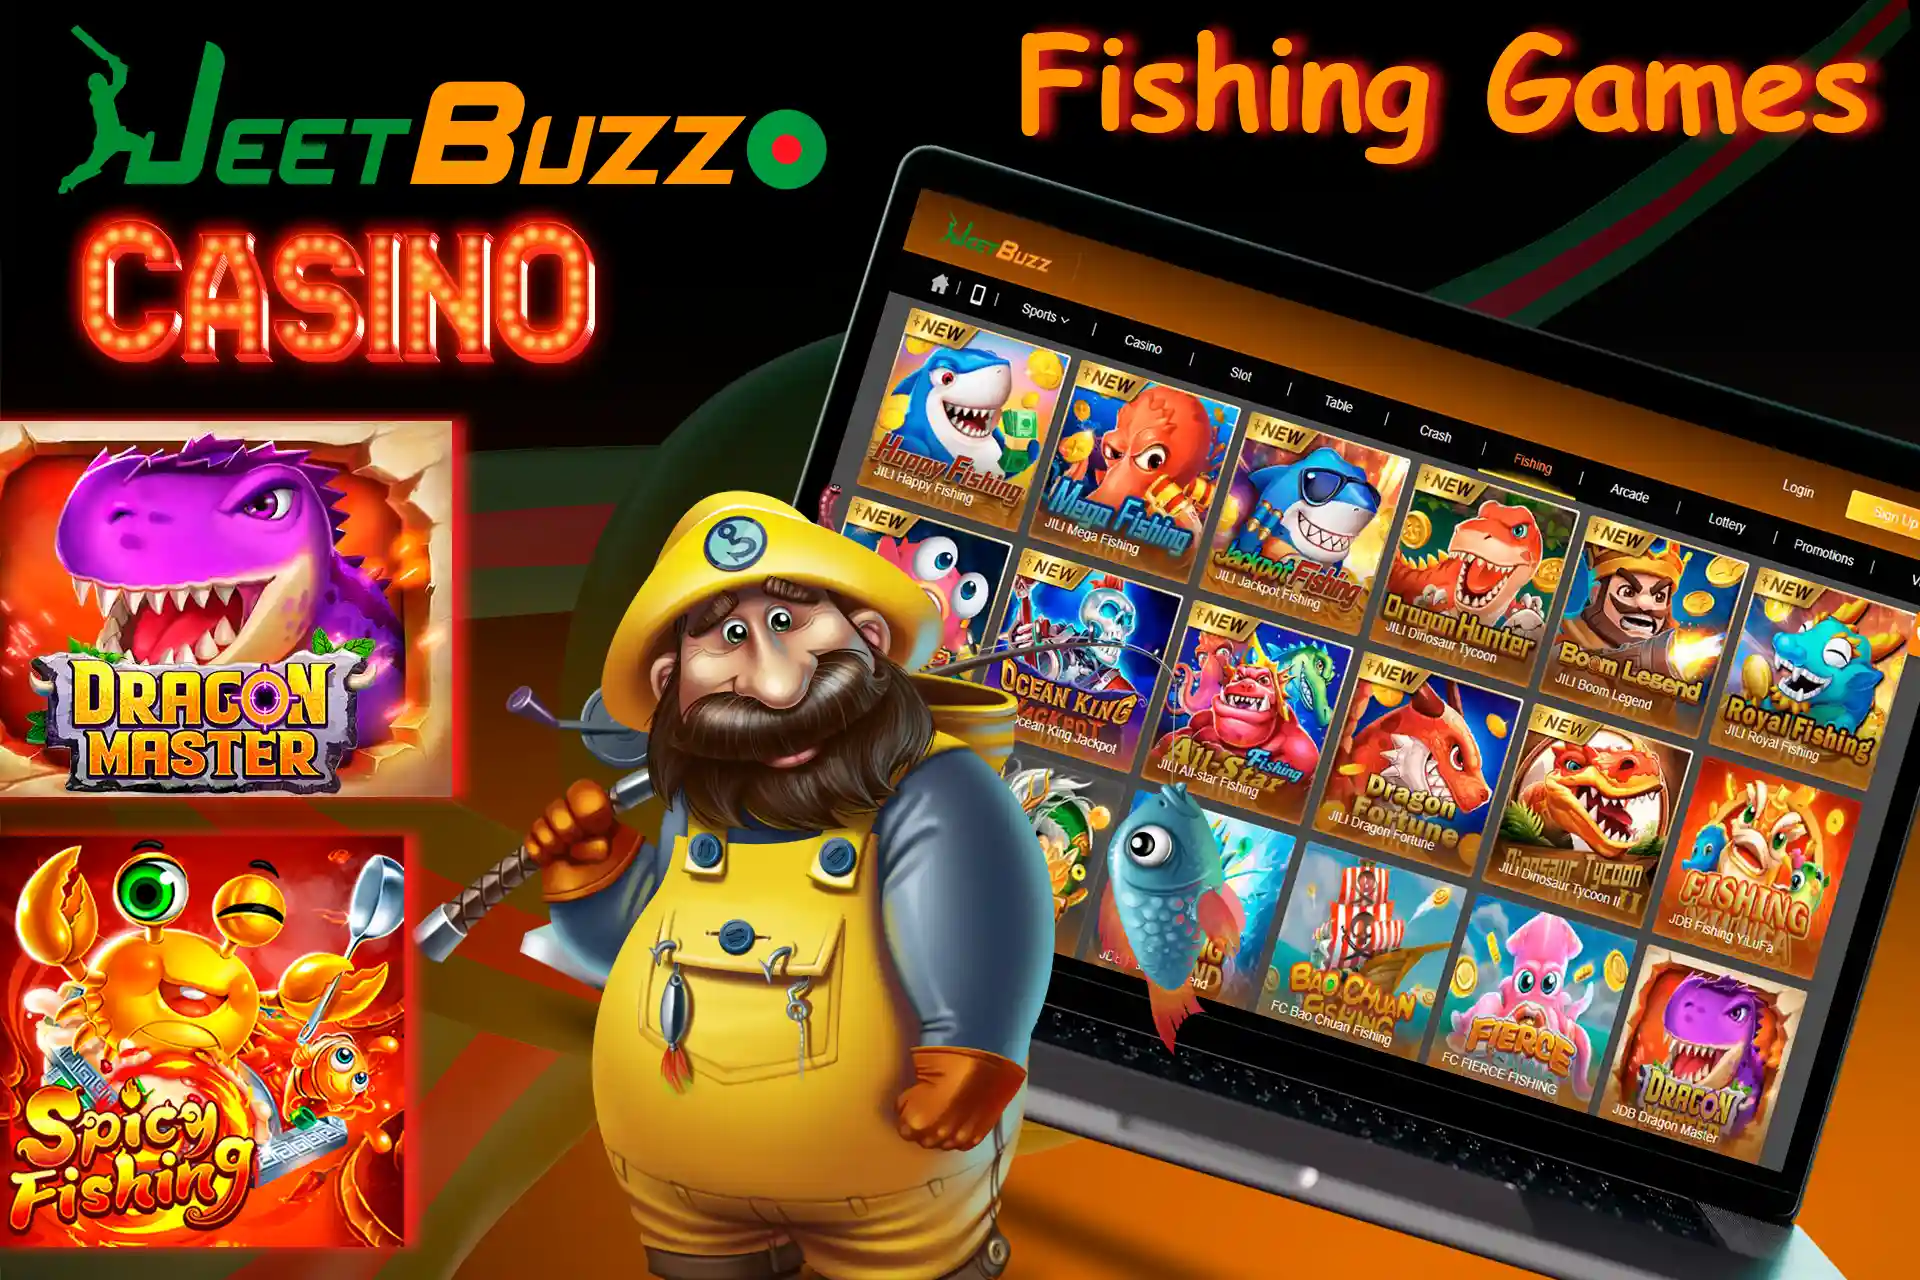 The category "Fishing Games" is represented by many games